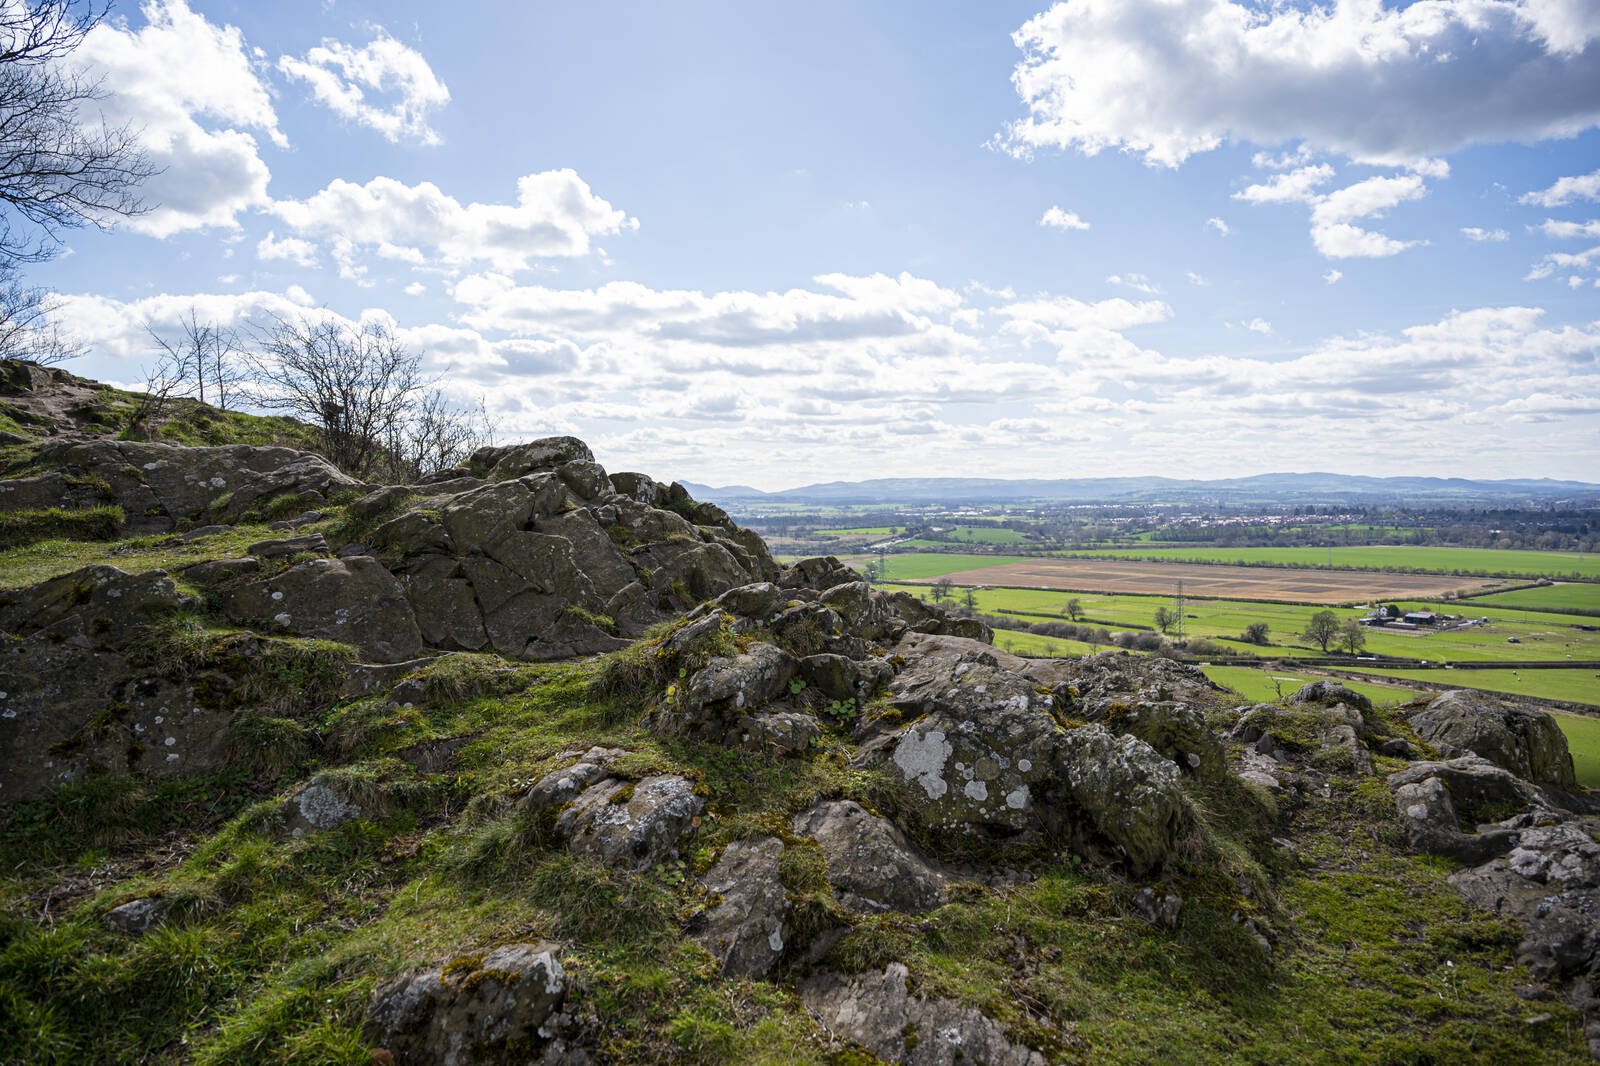 Image of Haughmond Hill by John Cooling